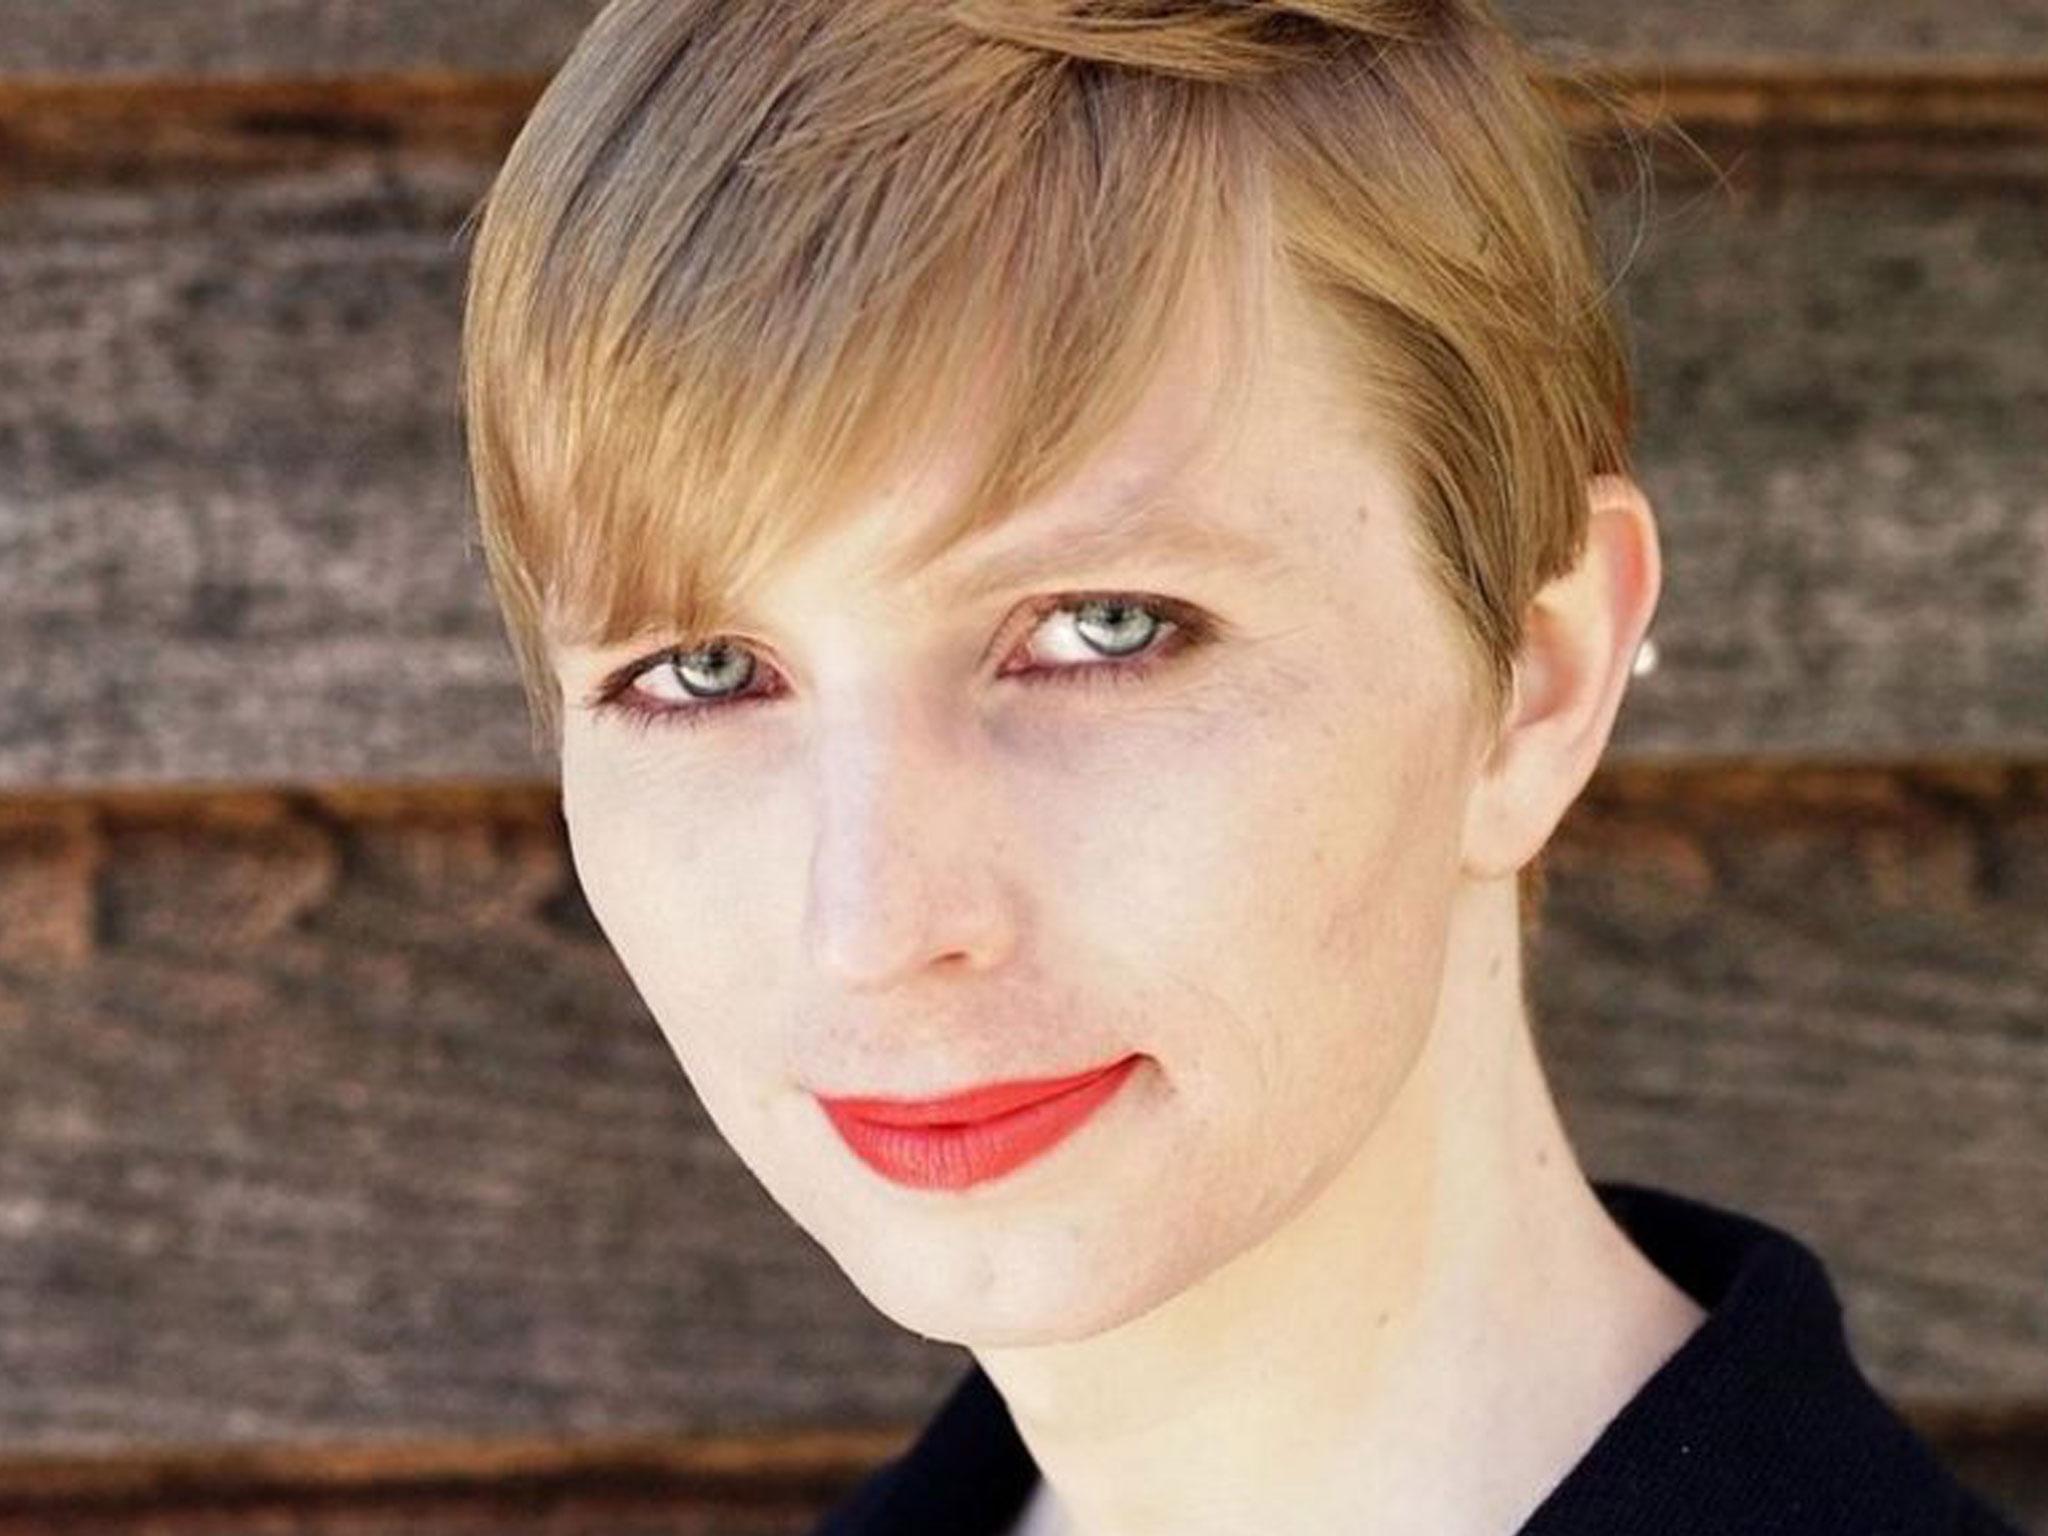 Chelsea Manning has been appointed as a Harvard Fellow, prompting a resignation from the school by former CIA official Mike Morell